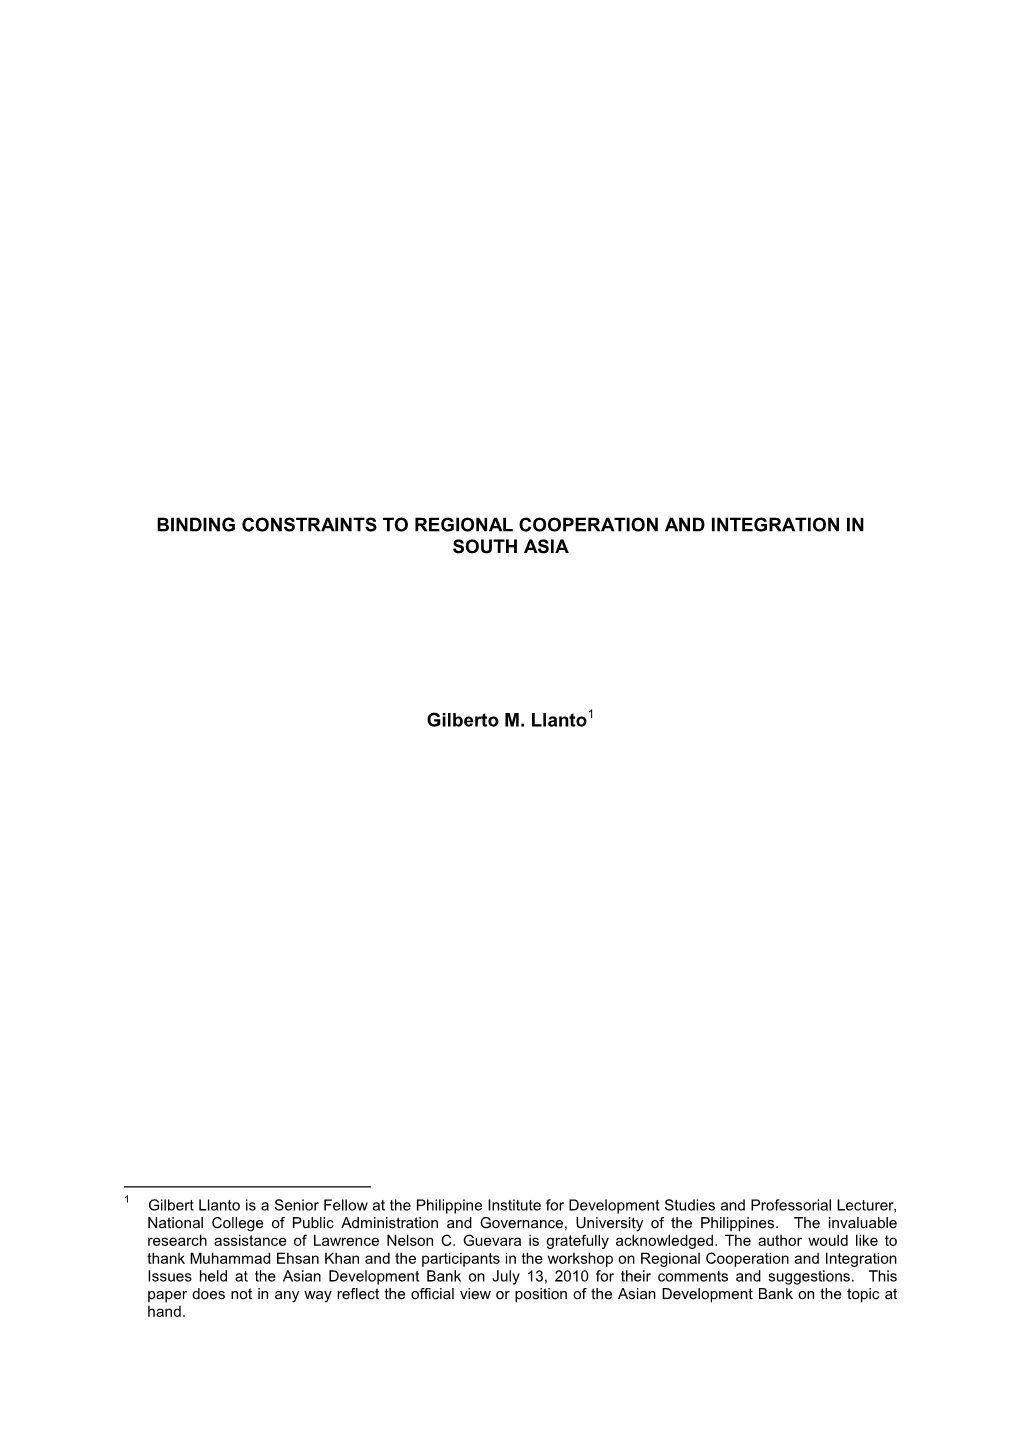 Binding Constraints to Regional Cooperation and Integration in South Asia